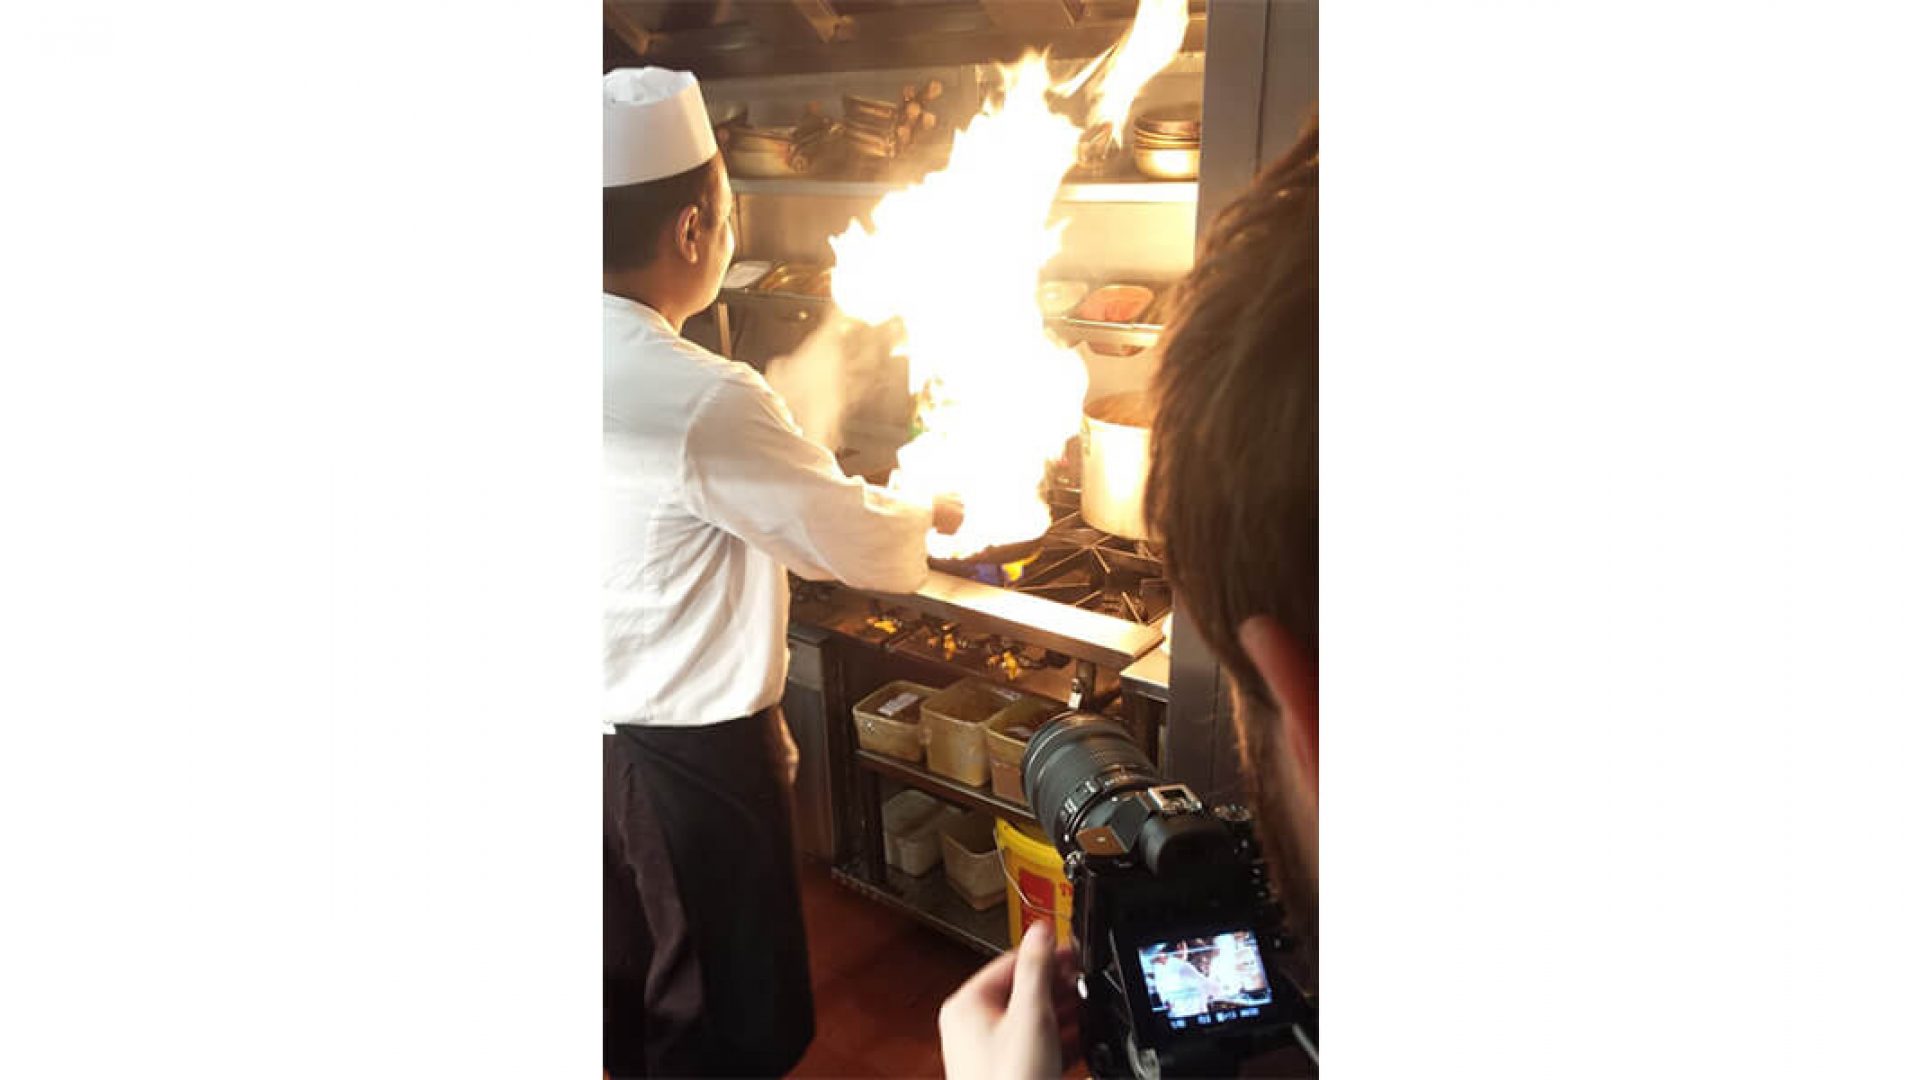 Restaurant Video For The Best Of Solihull